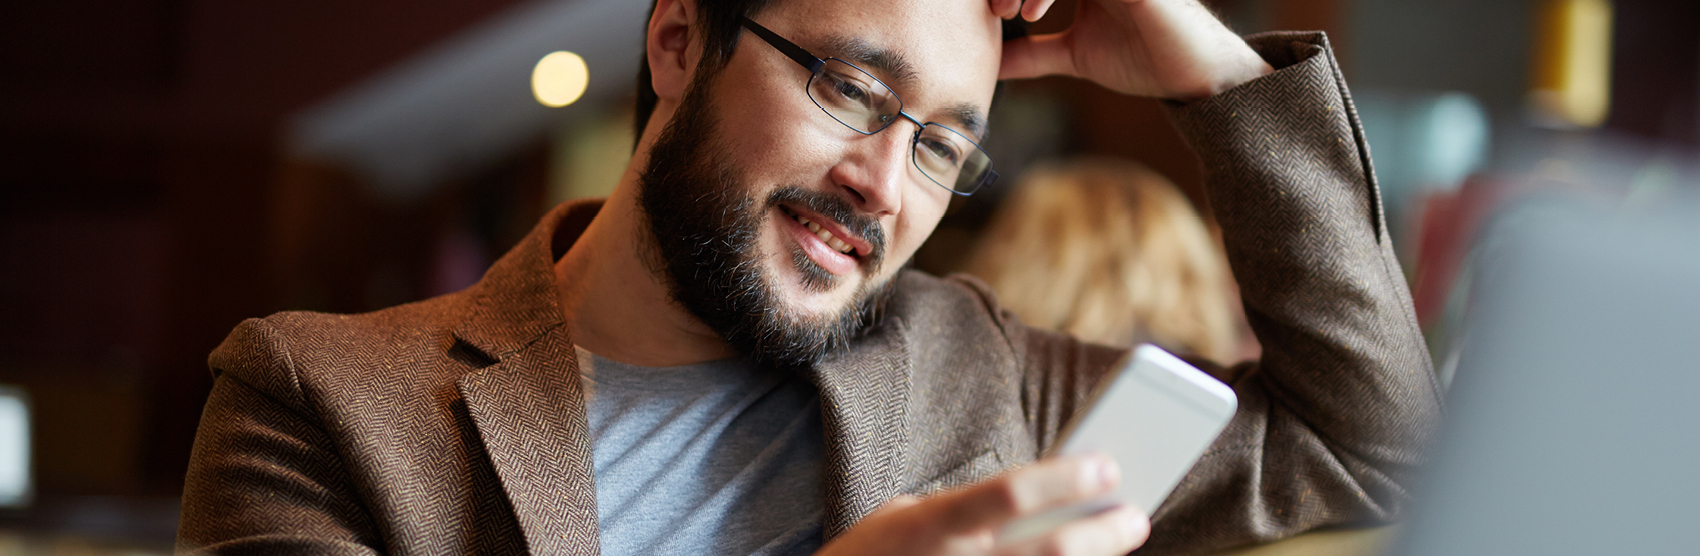 Man with beard looking at mobile device